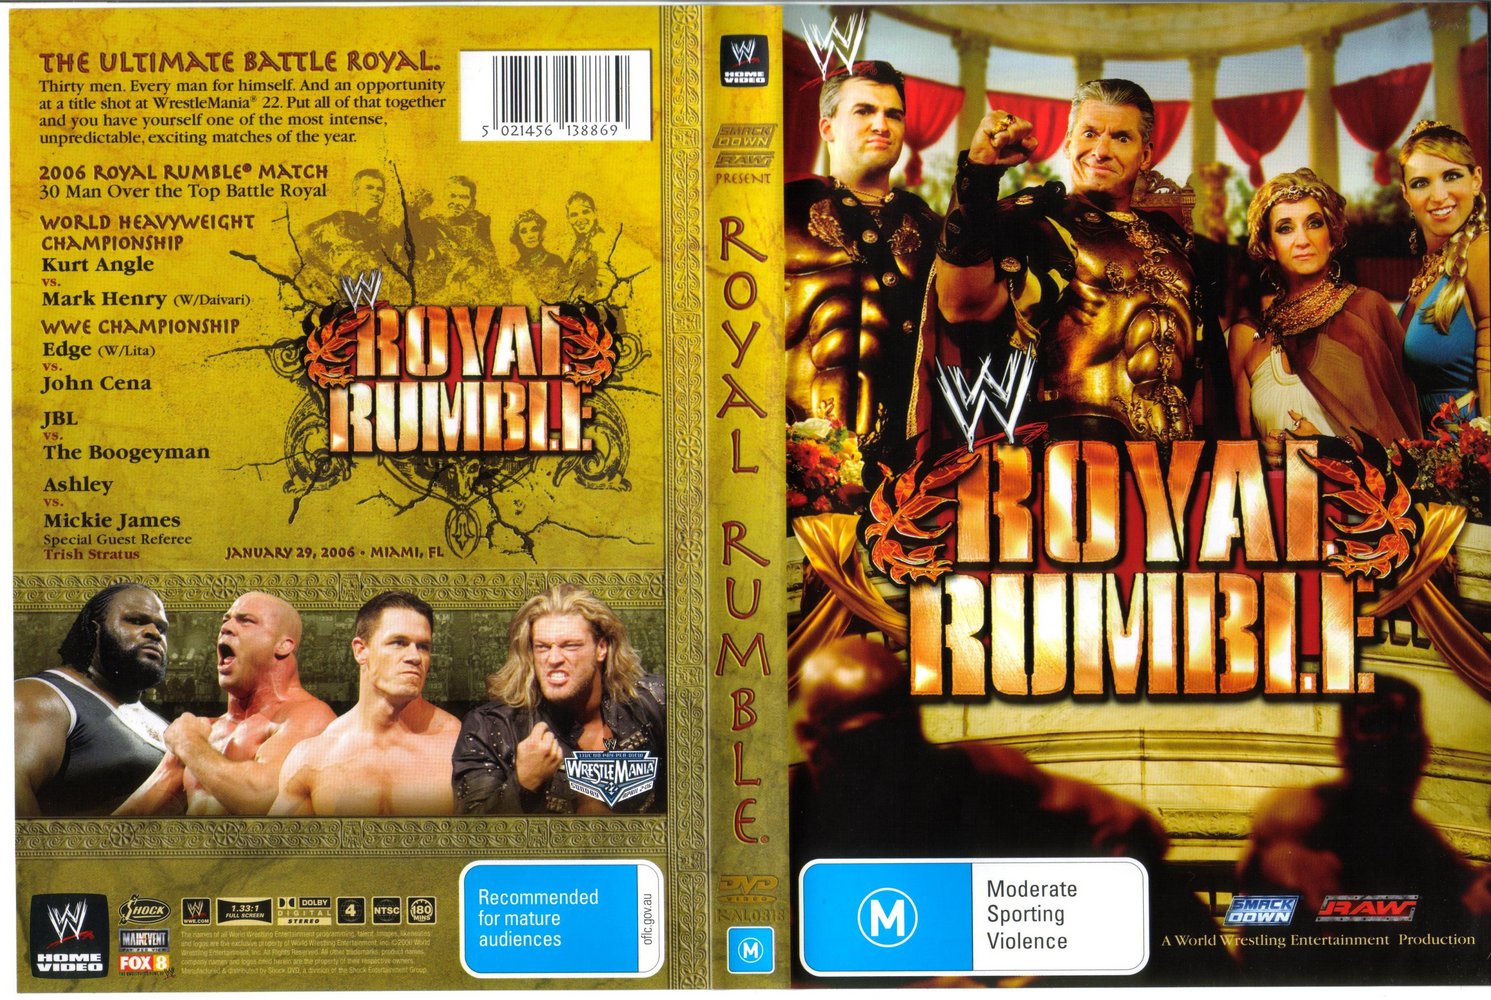 Jaquette DVD WWE Royal Rumble 2006